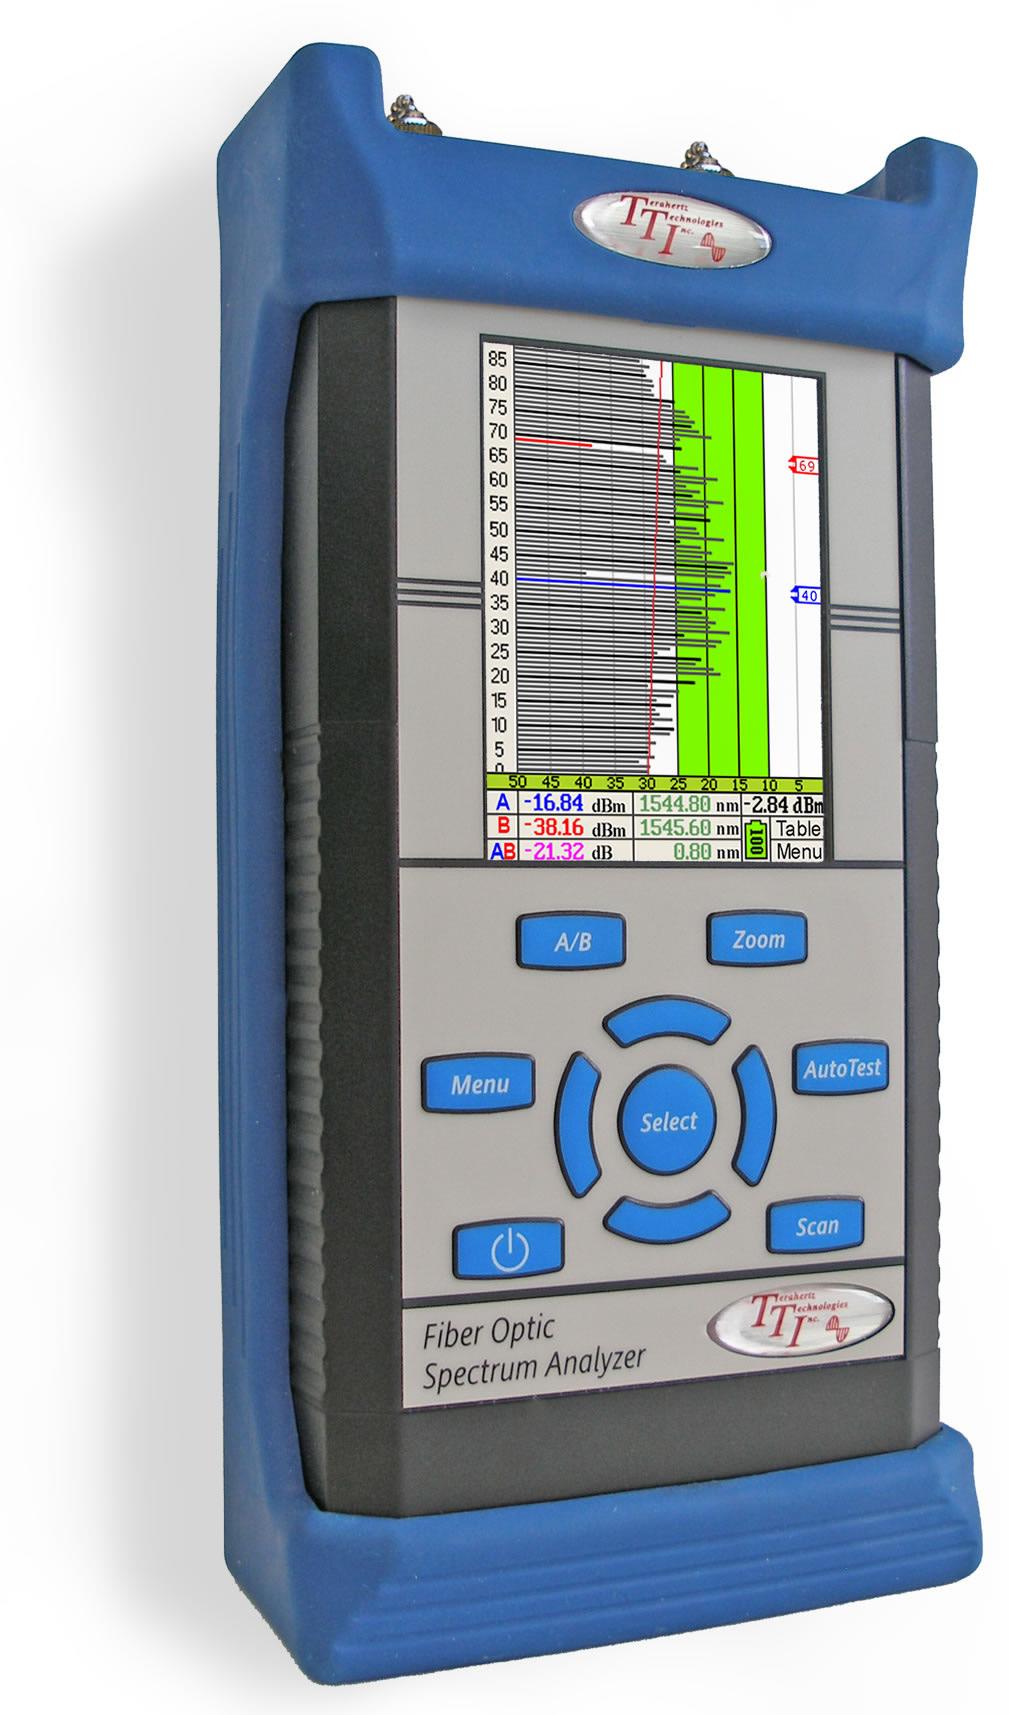 FTE-8100 Optical Spectrum Analyzer 88 Channel DWDM Analyzer The FTE-8100 Handheld OSA tests up to 88 channels at 50 or 100 GHz channel spacing in the C band of the ITU Grid Unique 8+1 CWDM Channel